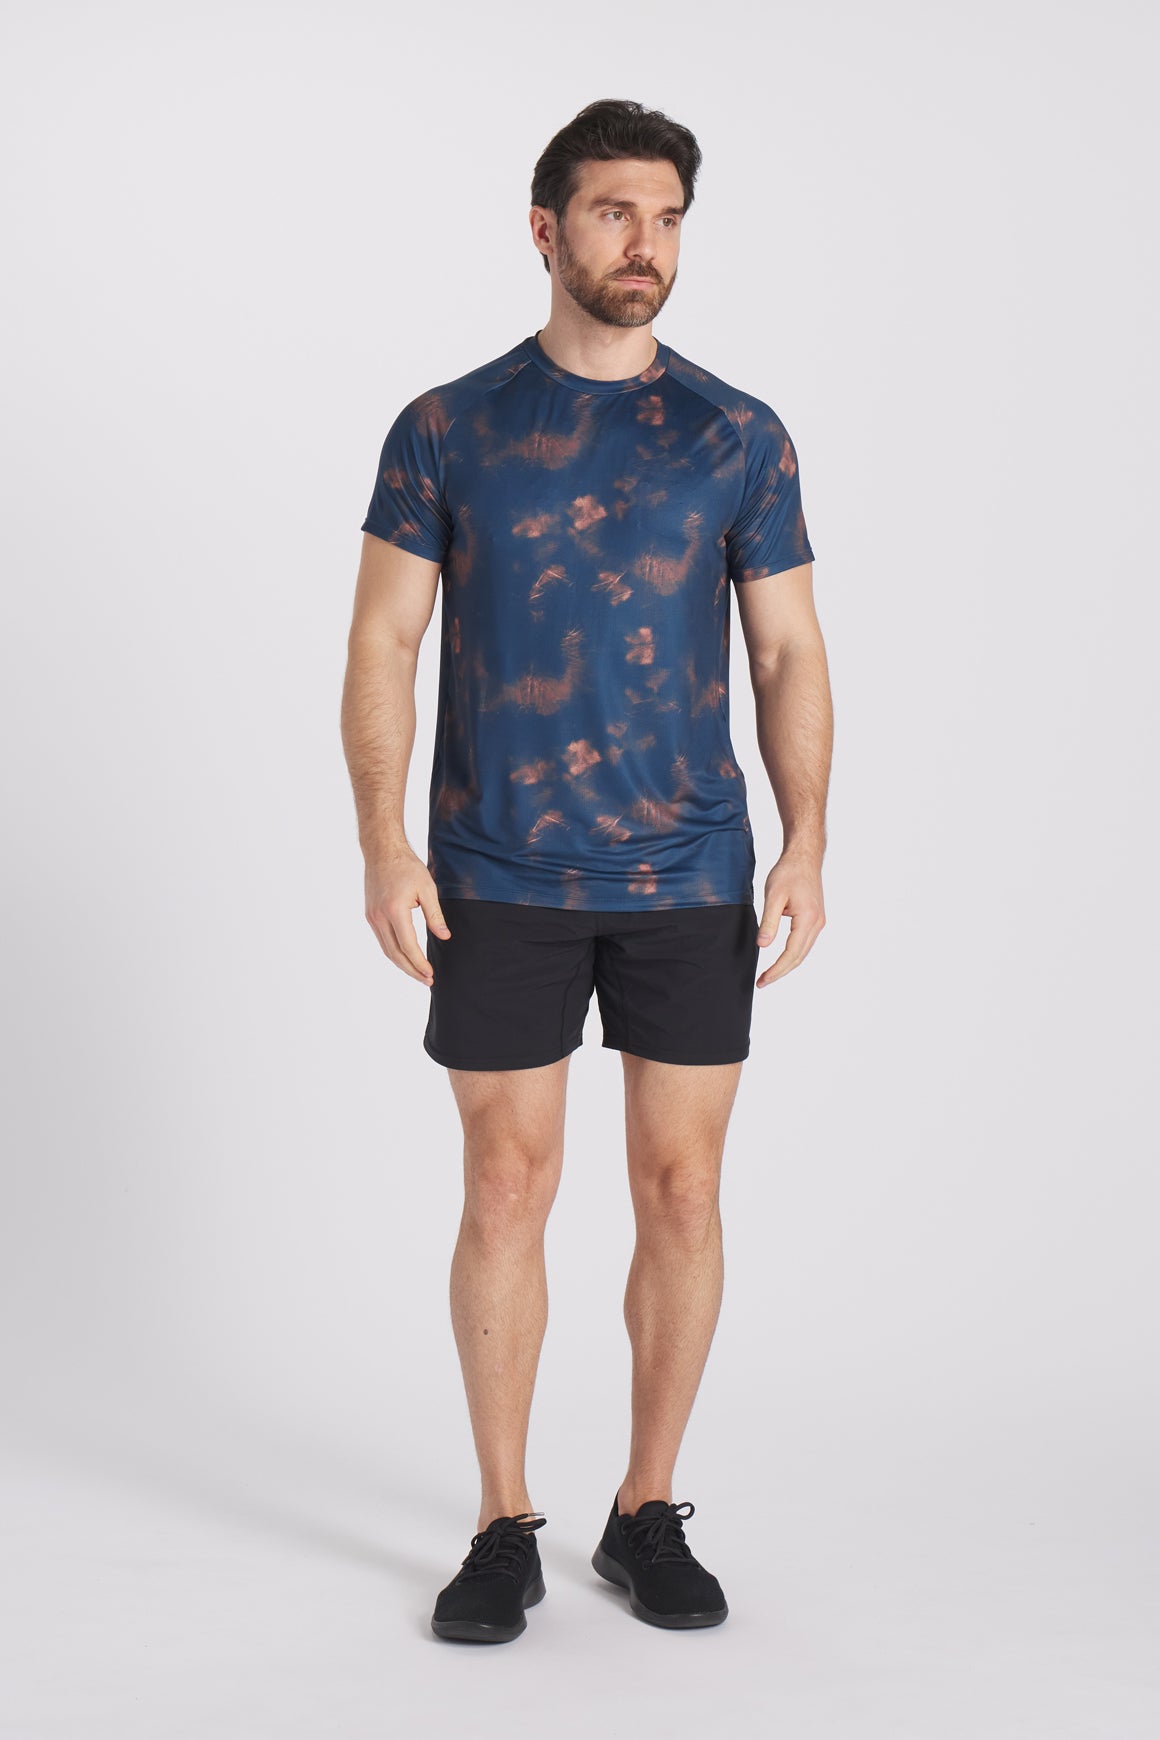 Fearless Performance T-shirt - Ultralight Breathable Tee - SNO